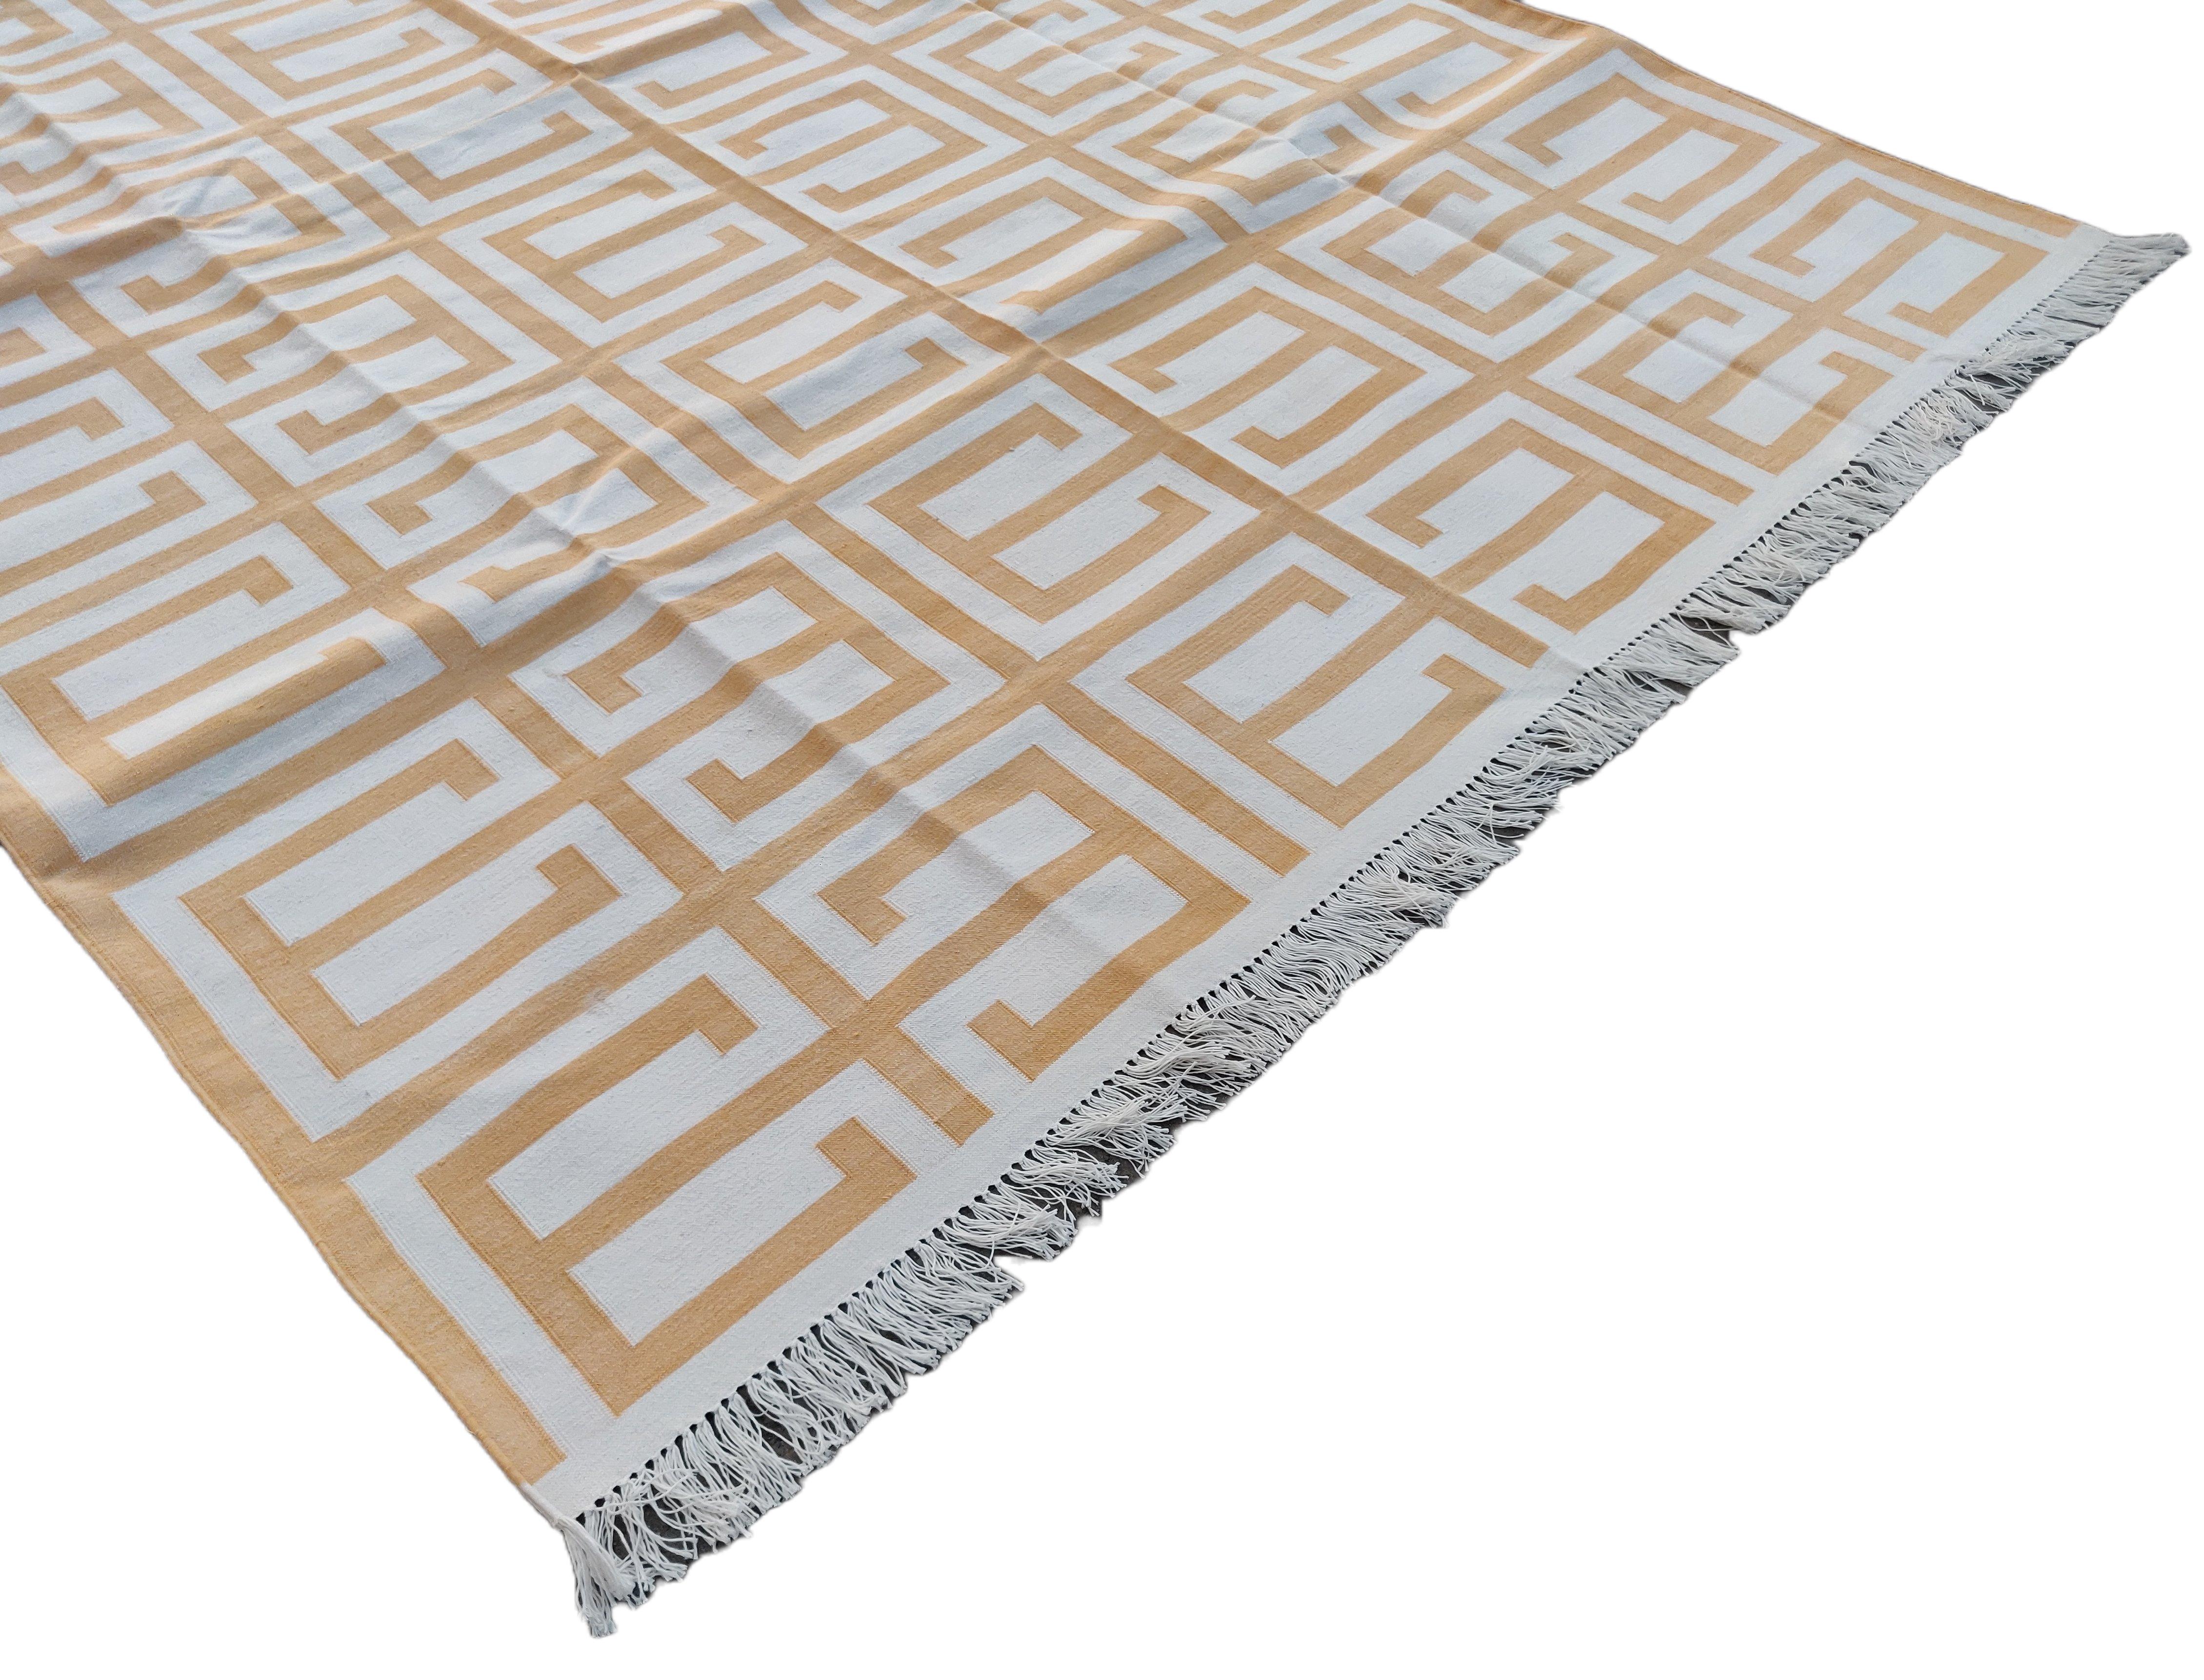 Handmade Cotton Area Flat Weave Rug, 6x9 Yellow, White Geometric Indian Dhurrie For Sale 1